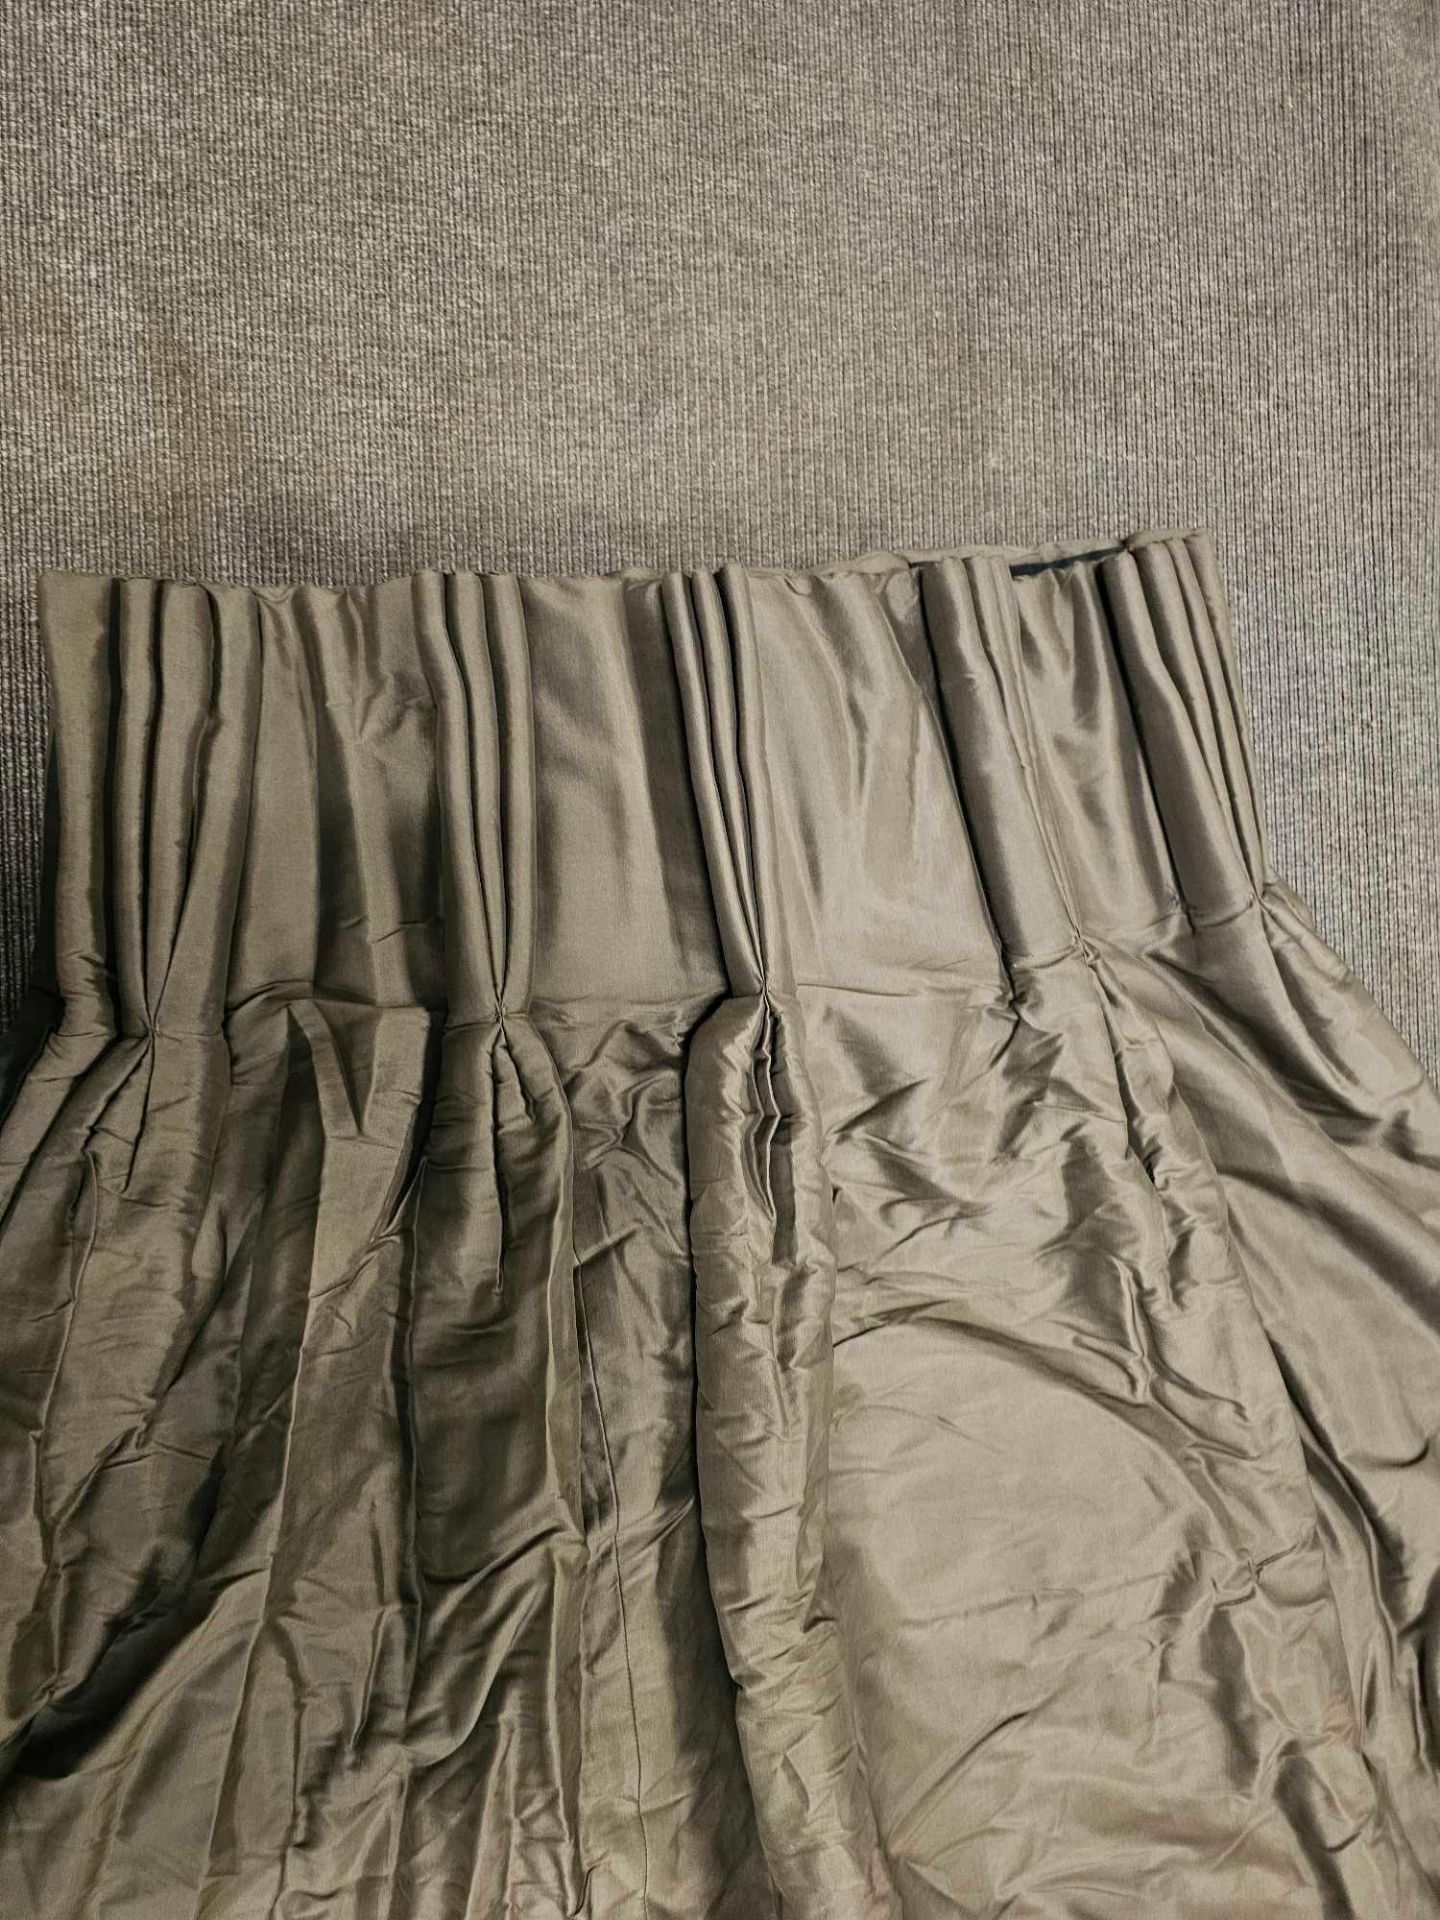 Pair Of Olive Curtains Size 120 x 250cm ( Ref Dorchspa 106) - Image 2 of 3